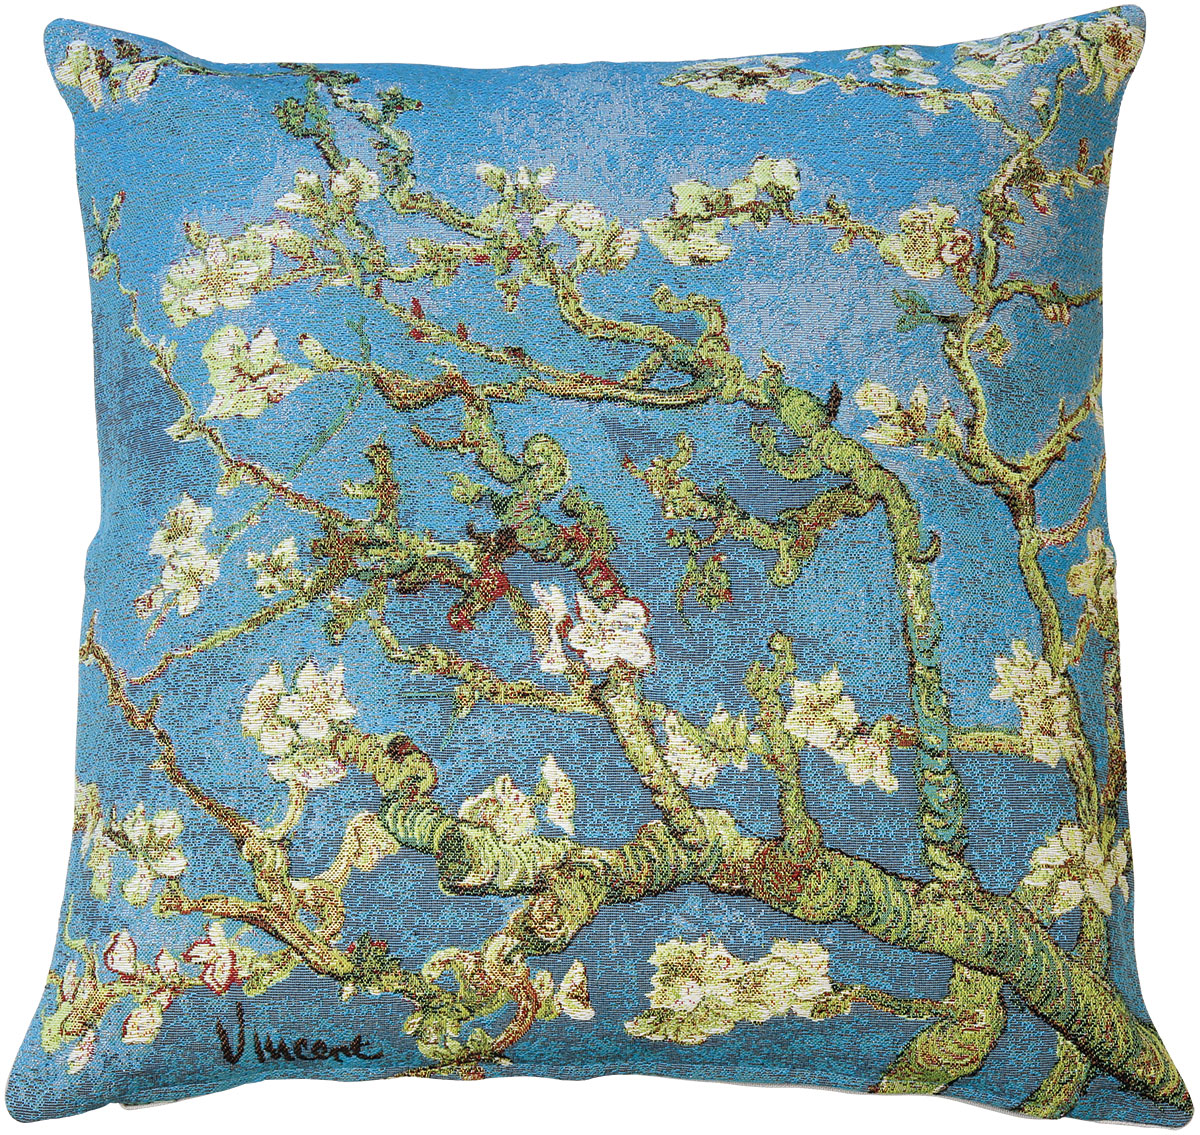 Cushion cover "Almond Blossom" by Vincent van Gogh